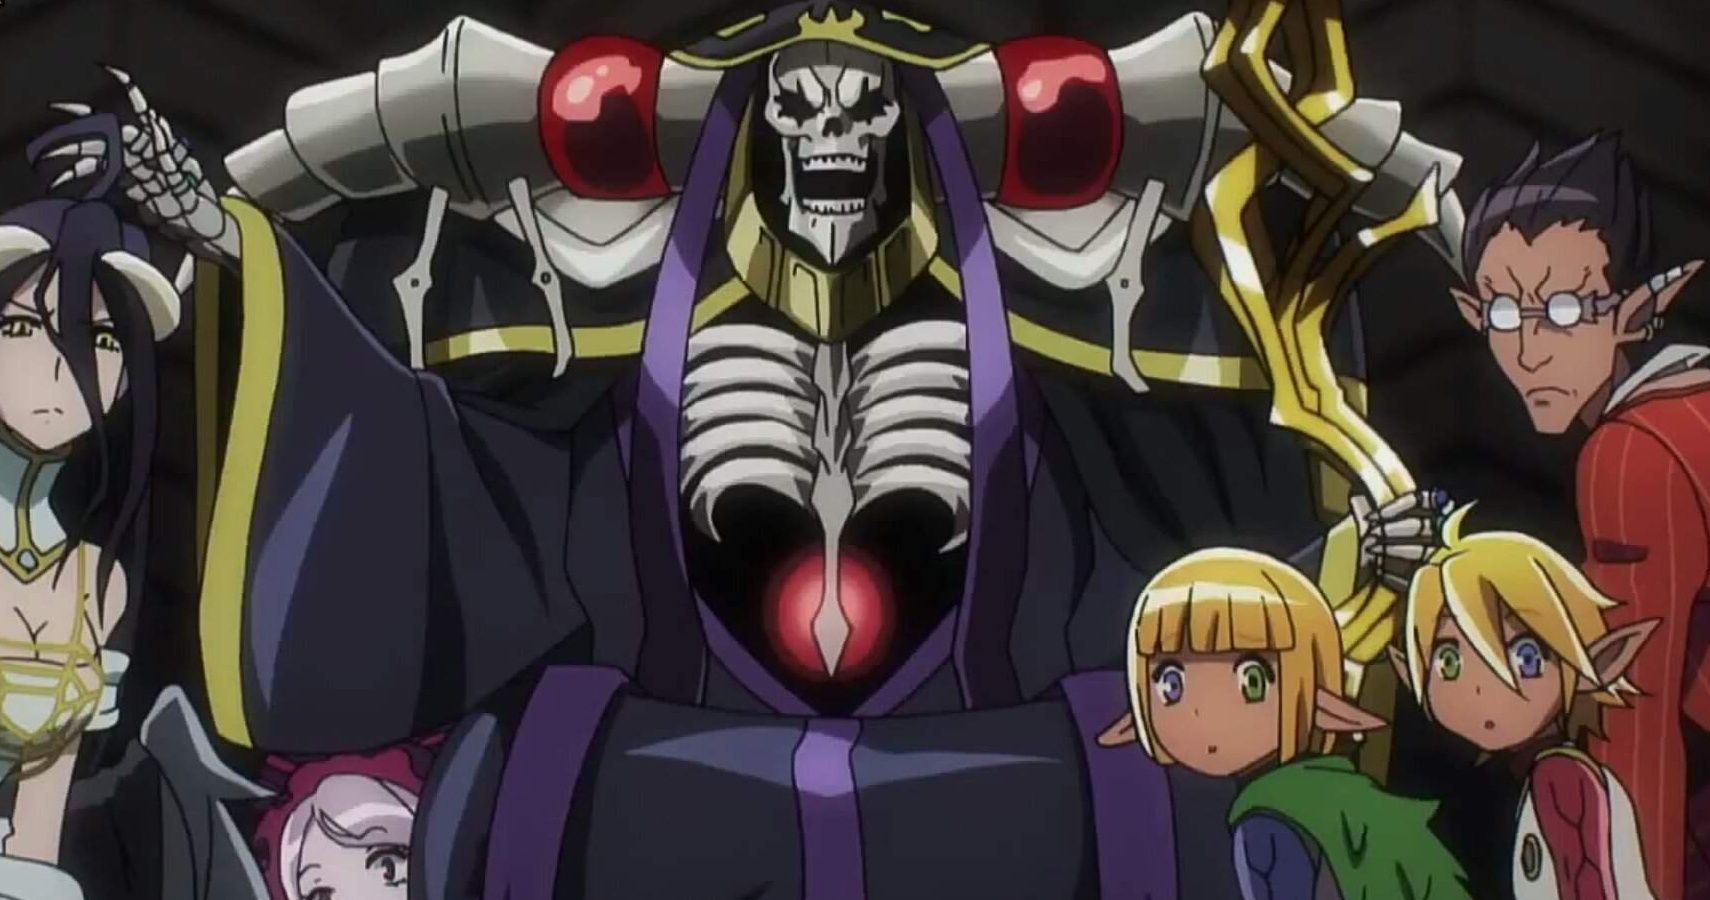 10. "Overlord" - wide 5